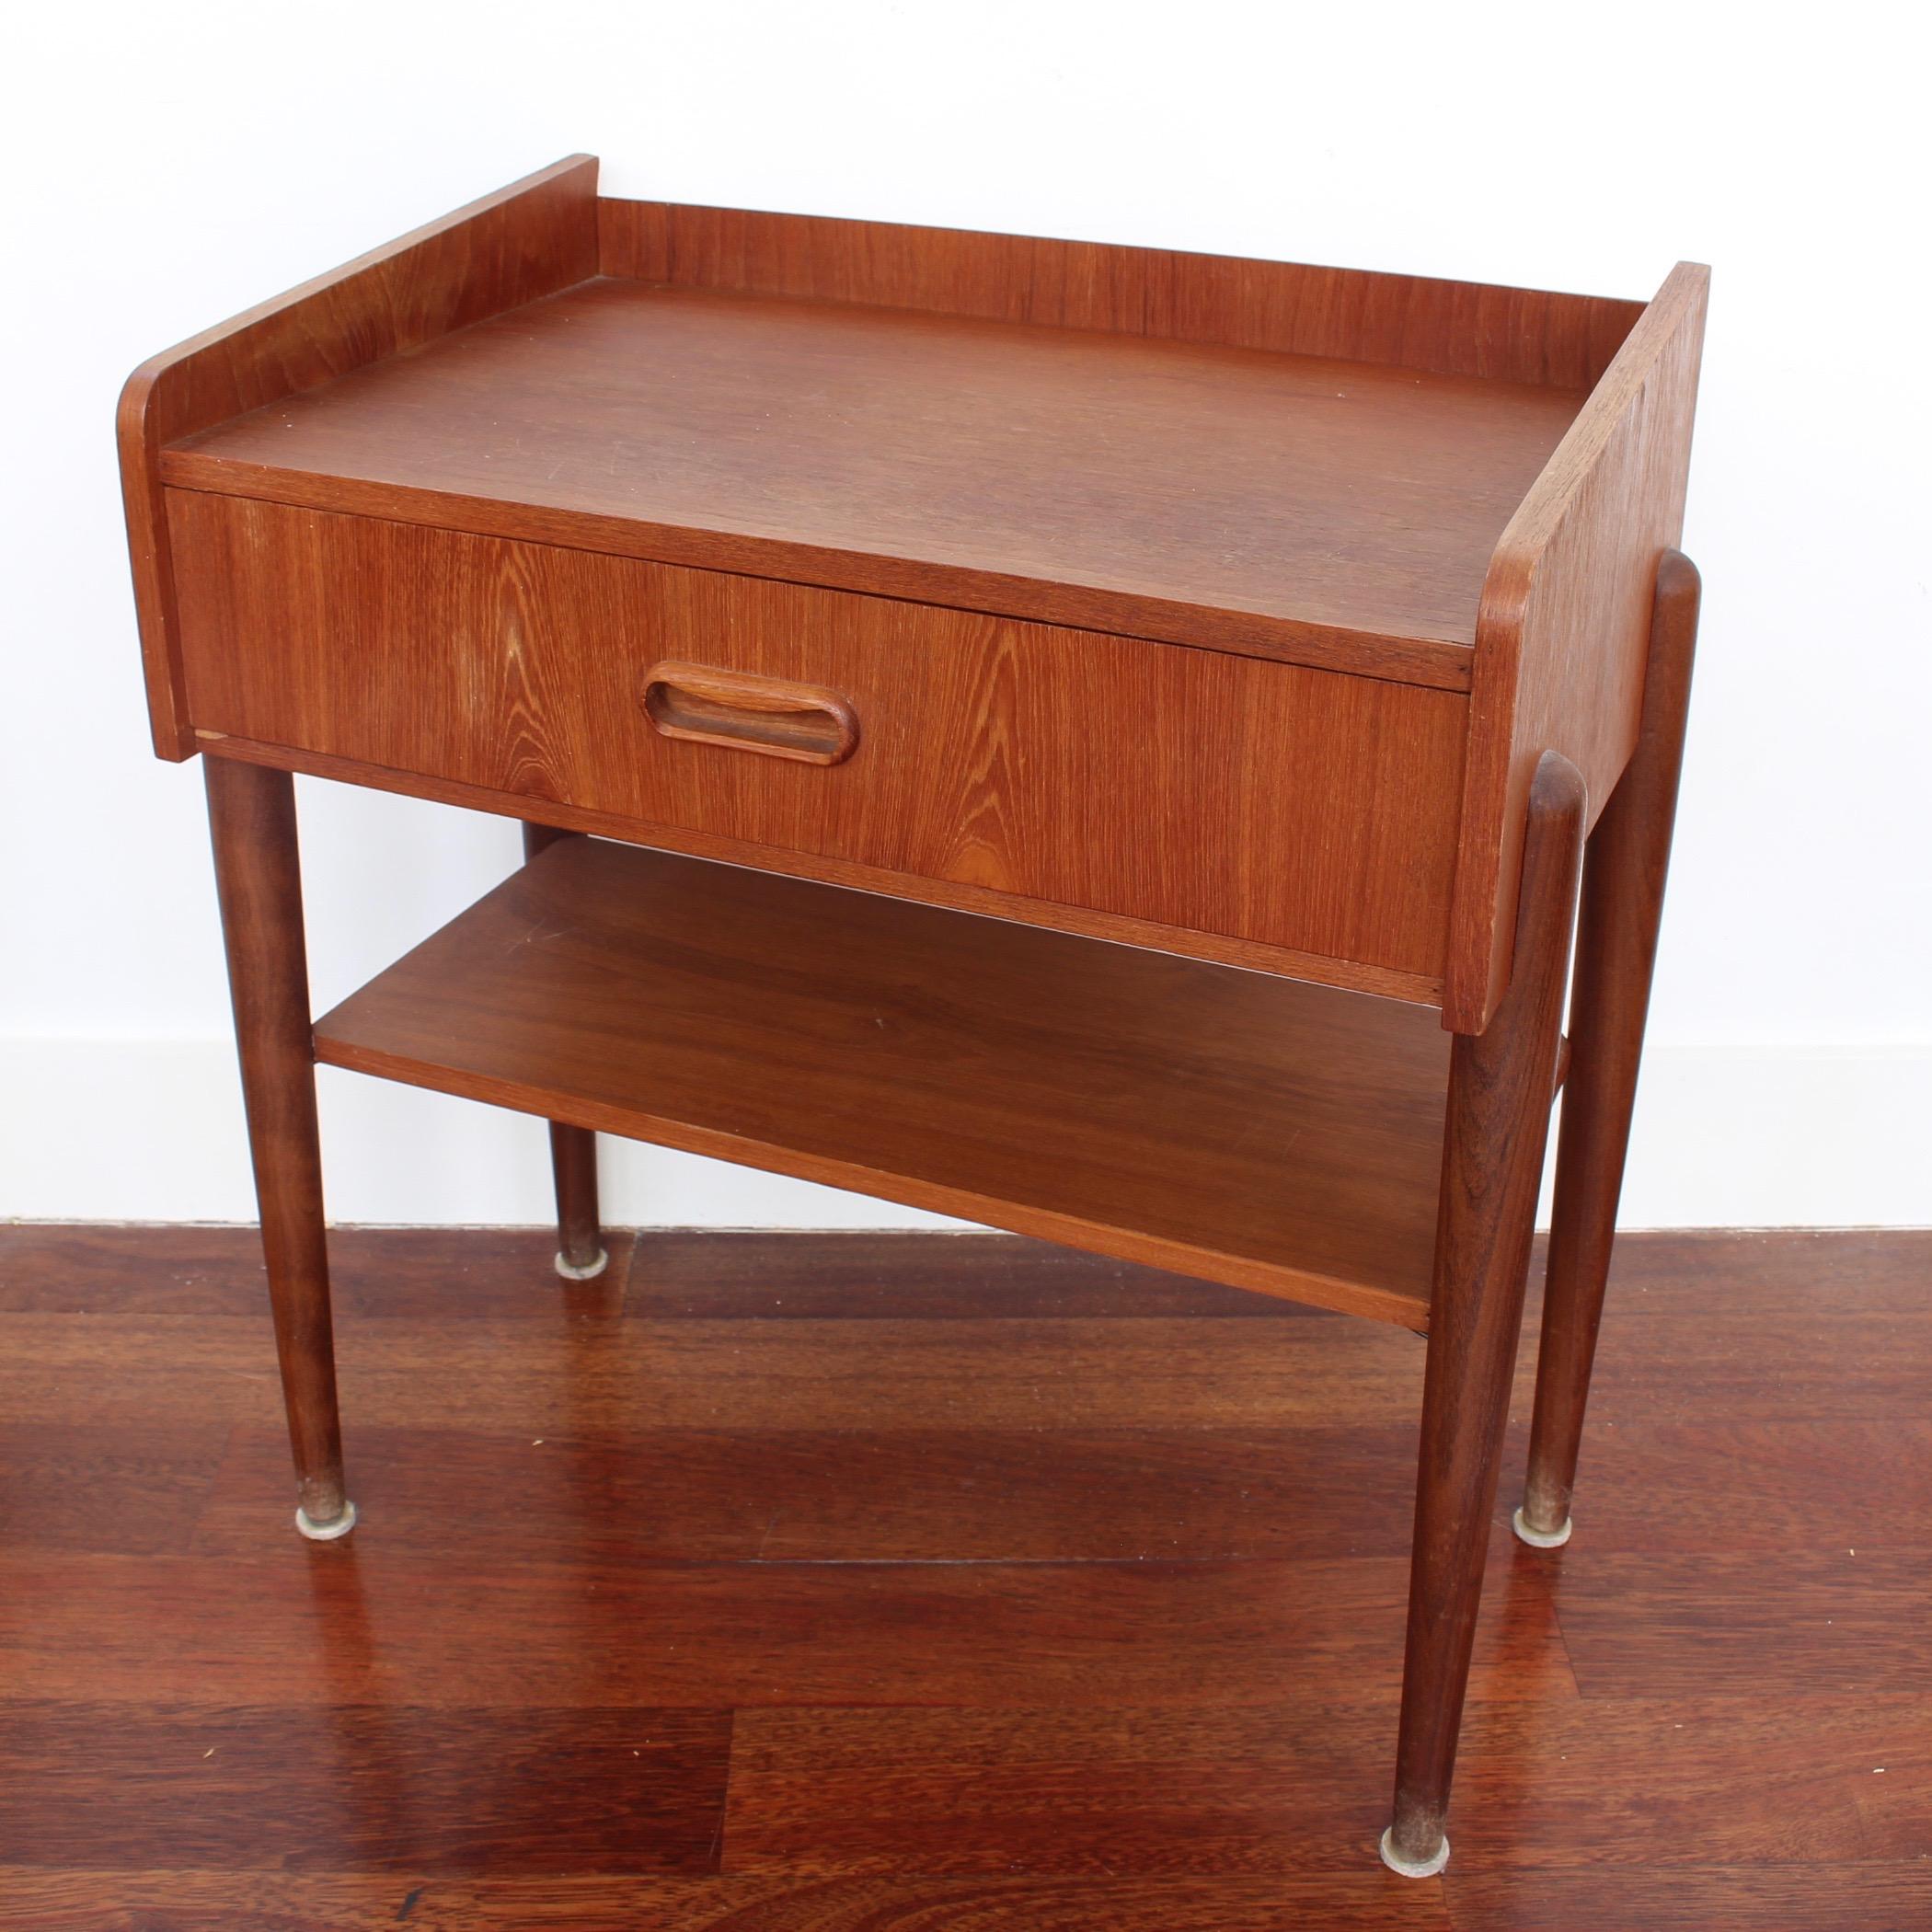 Scandinavian teak hallway table (circa 1960s). One drawer sits below the teak veneered top which sports a three-sided enclosure. Underneath, another horizontal surface for storage of books or magazines adds interest to the four-legged piece. It is